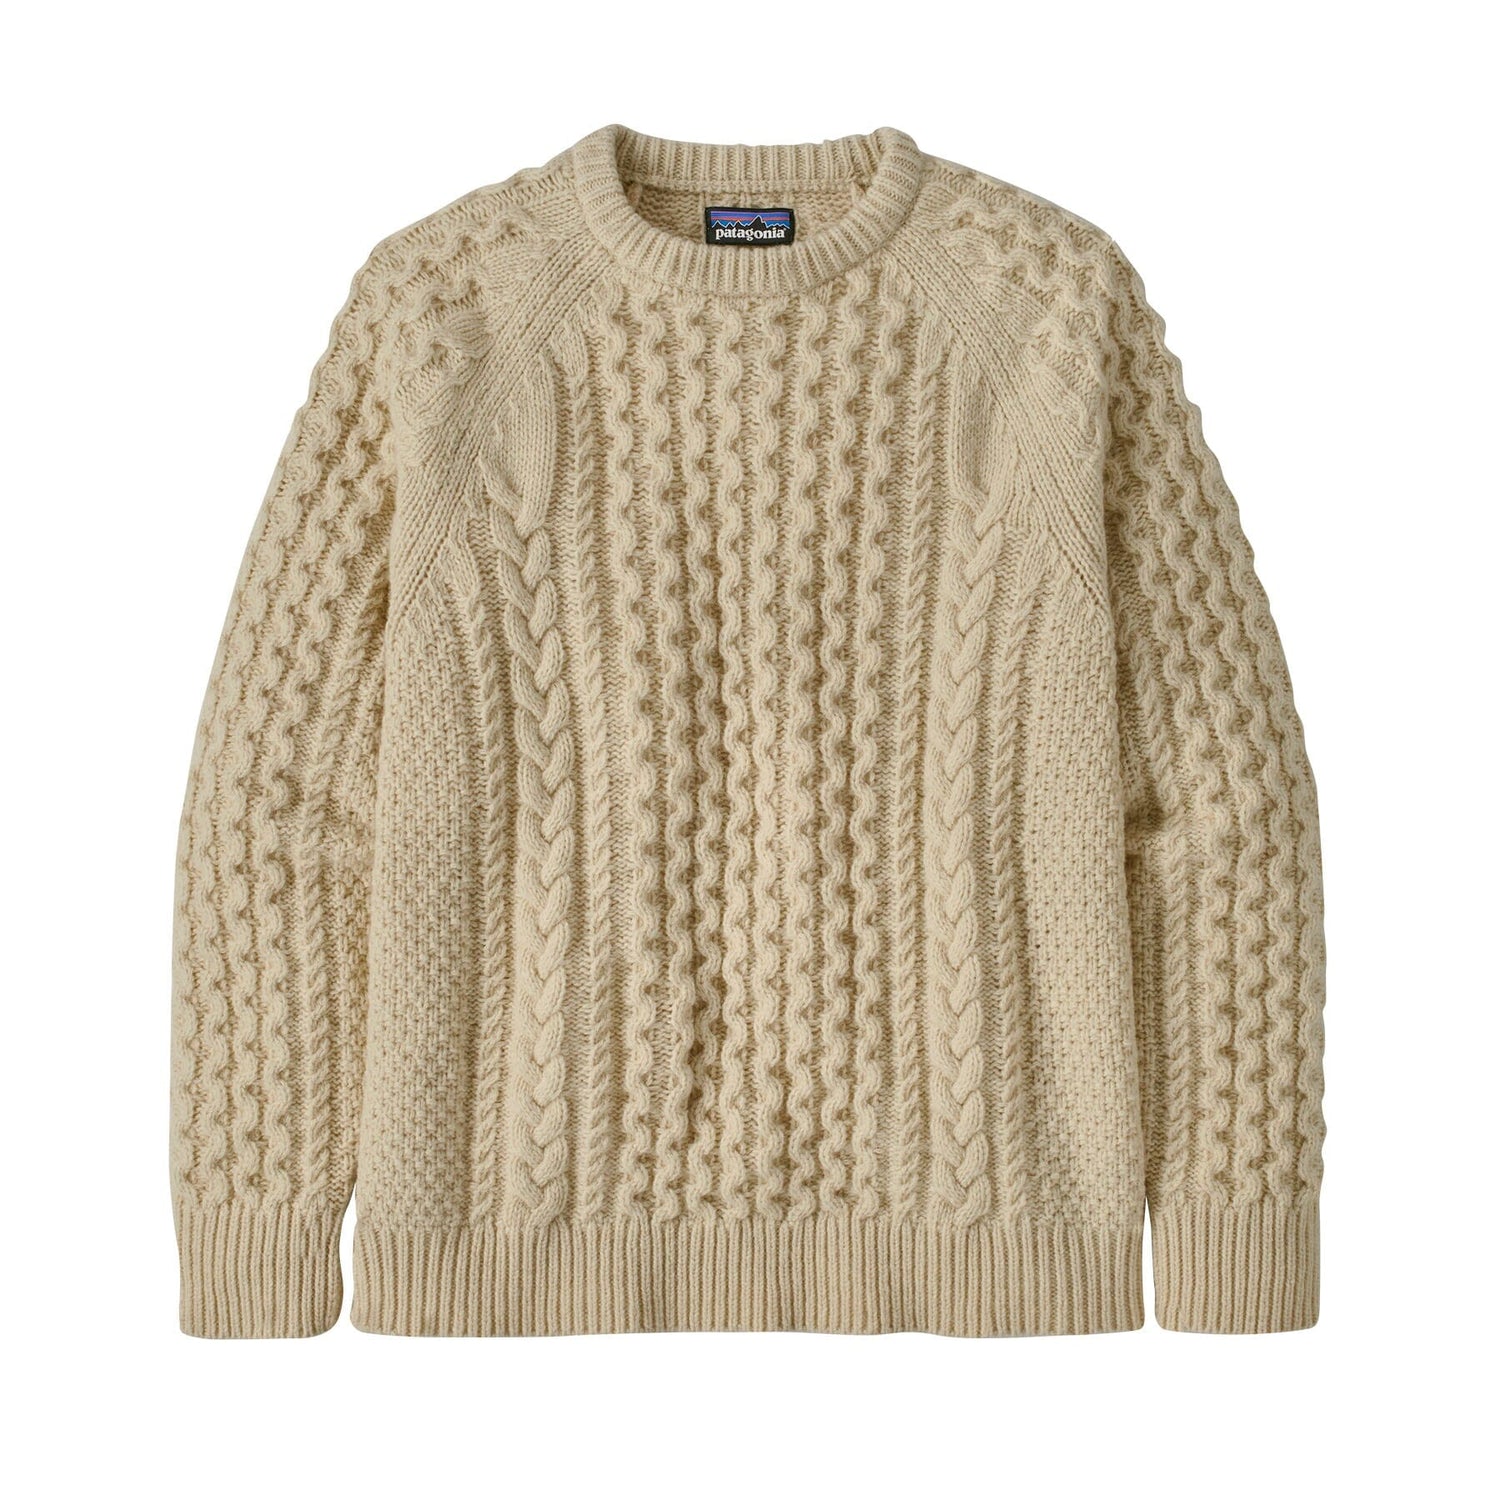 Patagonia Unisex Cable Knit Crewneck Sweater - Recycled Wool & Recycled Nylon Natural Shirt